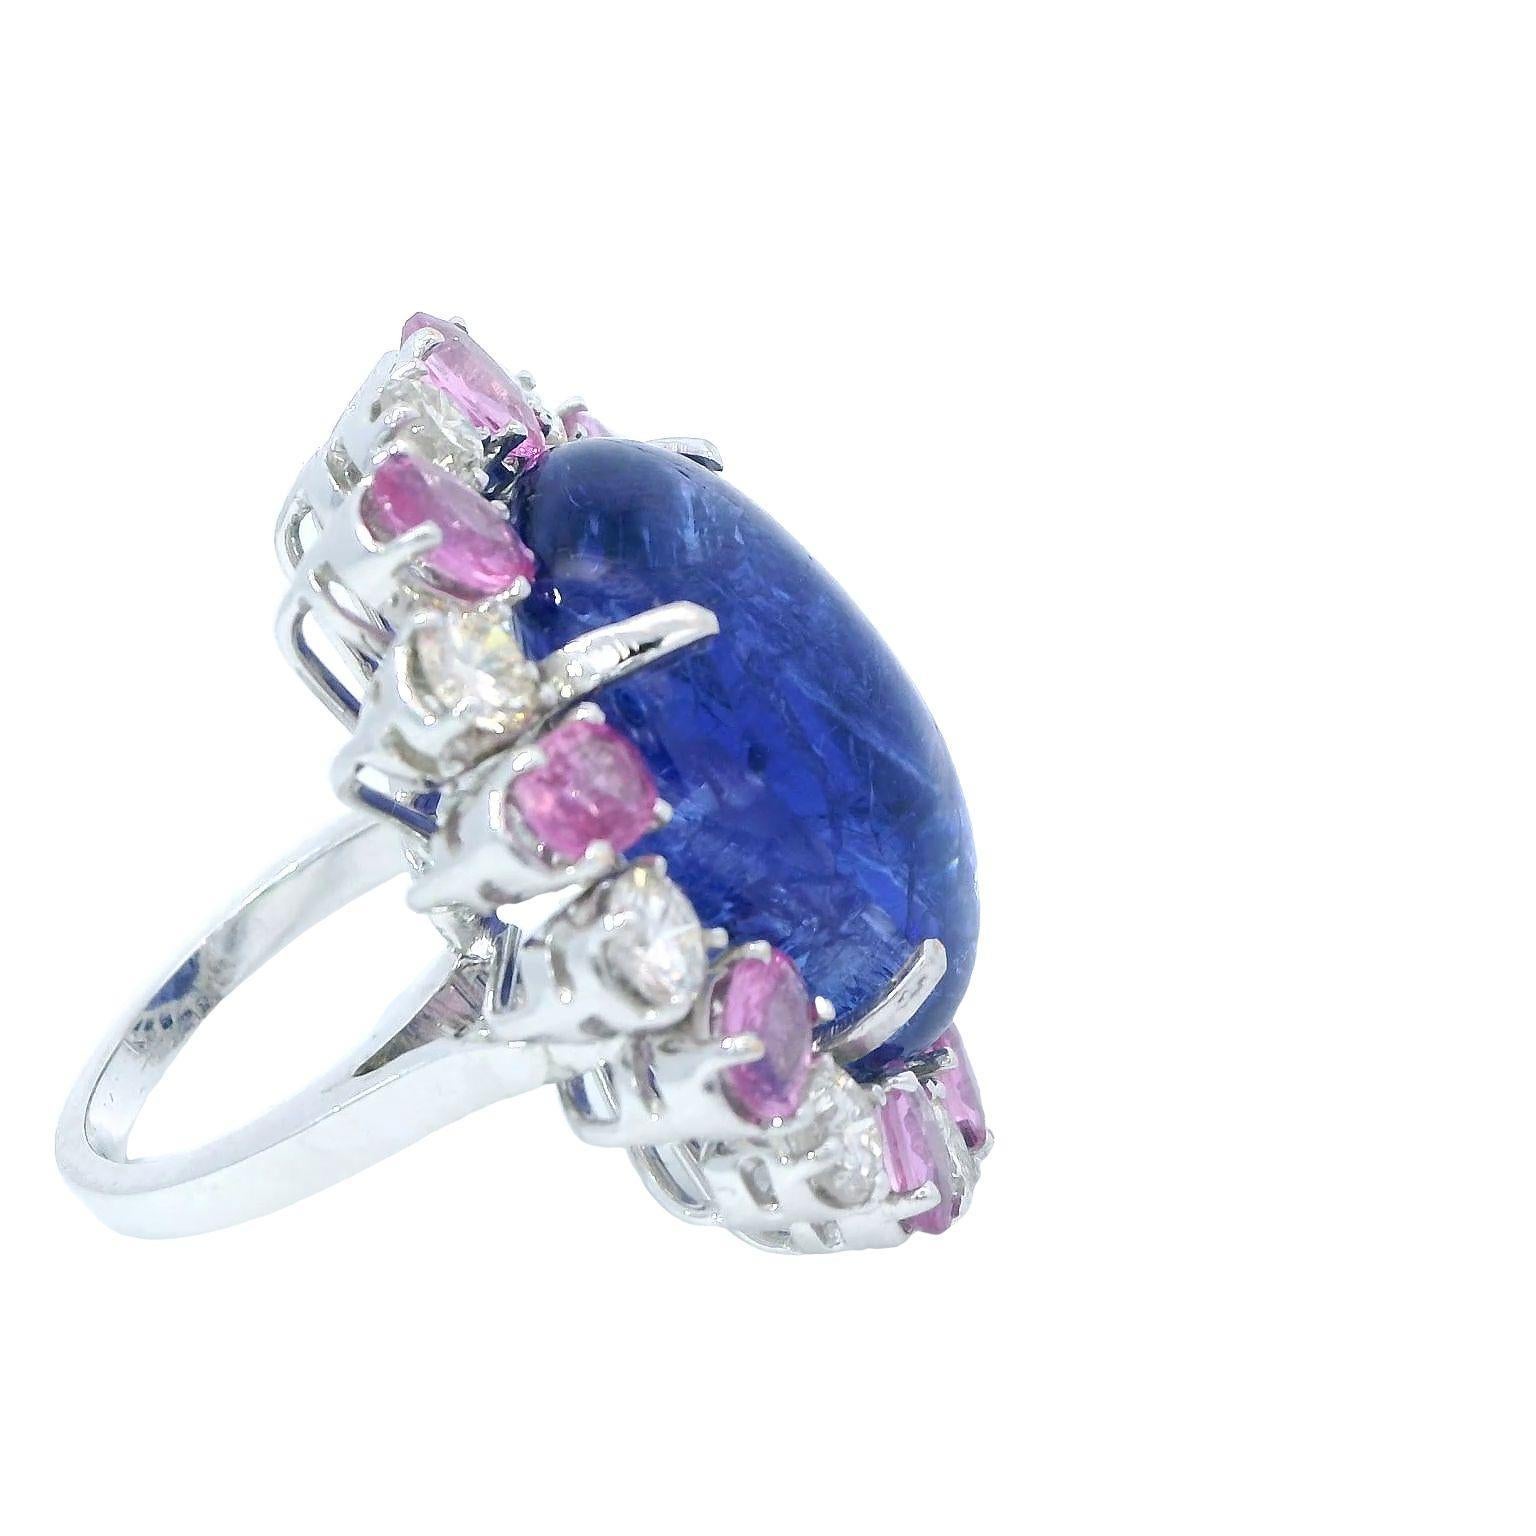 The ring showcases a captivating centerpiece in the form of a cabochon-cut Tanzanite, weighing an impressive 38.35 carats. The Tanzanite stone exhibits a smooth, rounded surface that enhances its natural beauty and color. Surrounding the Tanzanite